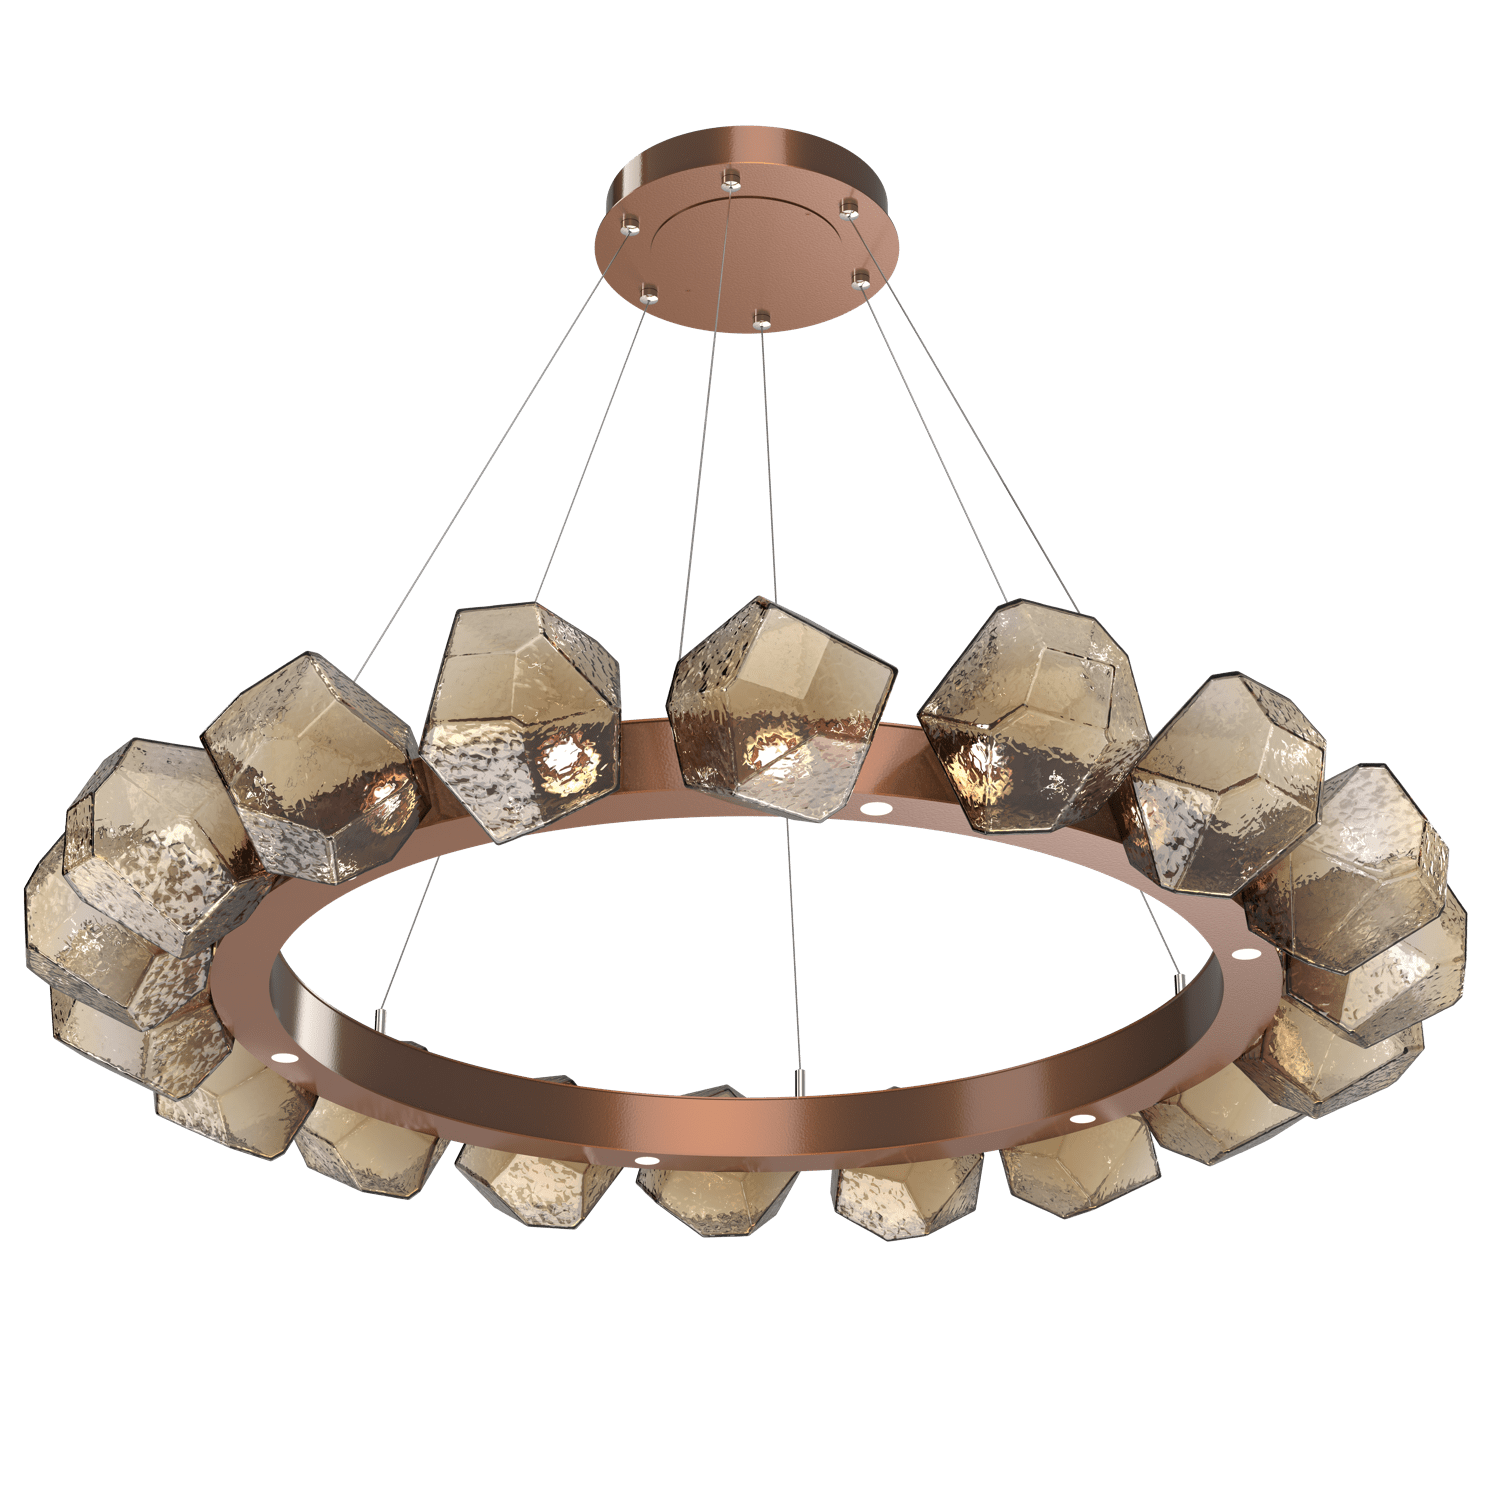 CHB0039-48-BB-B-Hammerton-Studio-Gem-48-inch-radial-ring-chandelier-with-burnished-bronze-finish-and-bronze-blown-glass-shades-and-LED-lamping